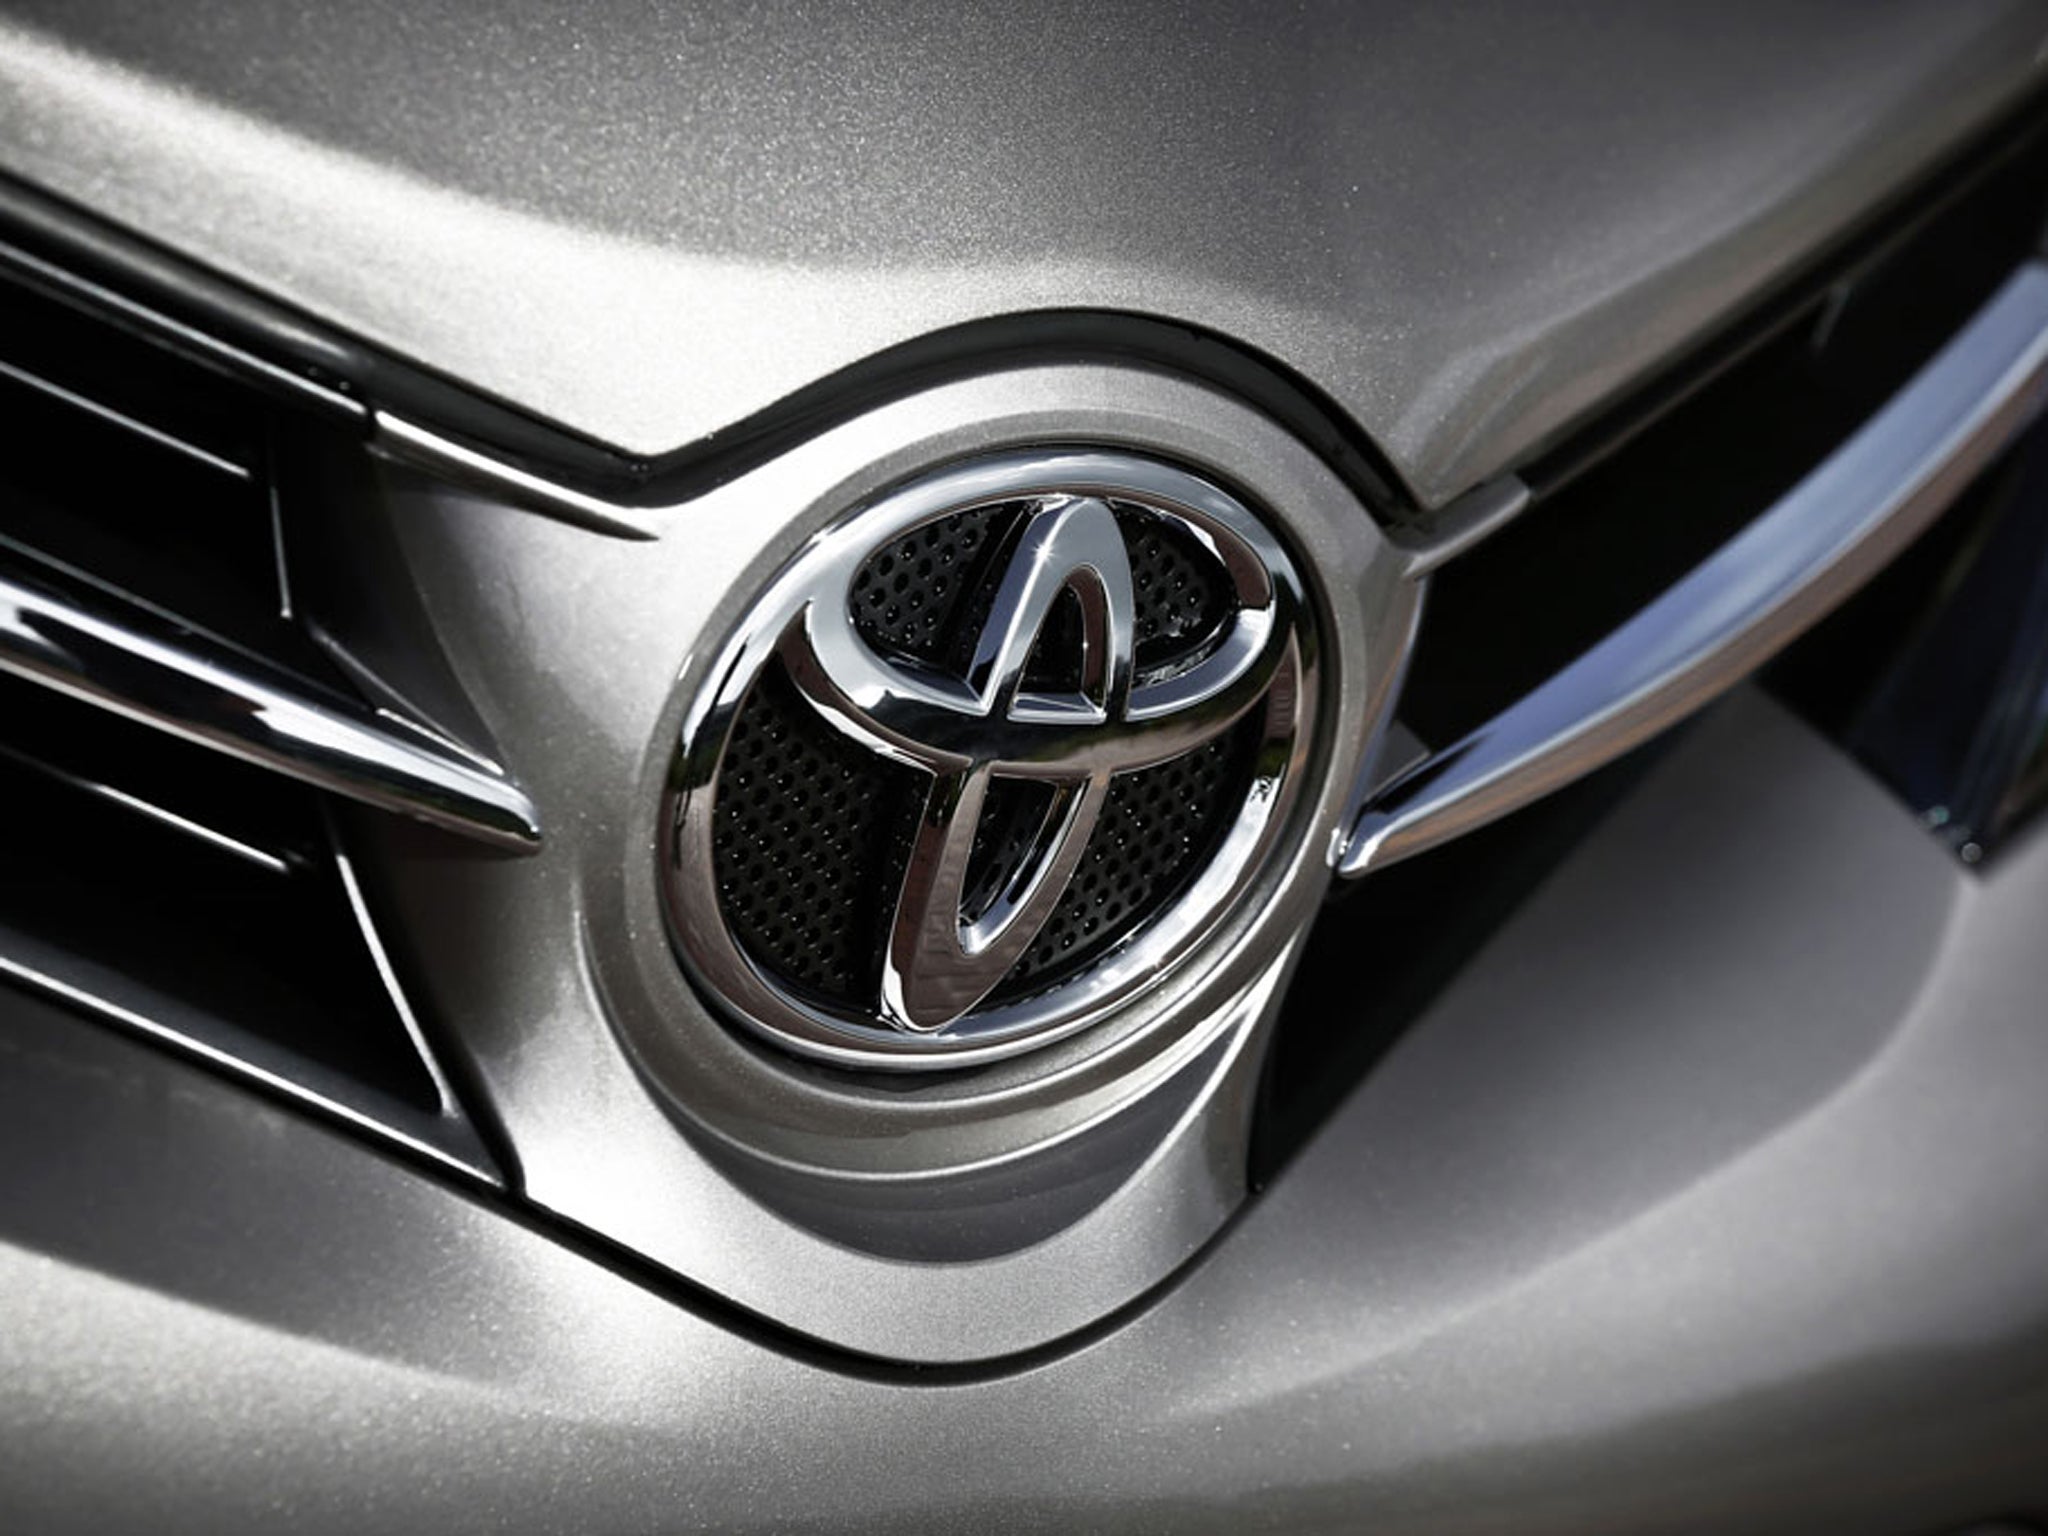 Japan's Toyota has agreed to pay more than $1bn to settle a US class-action suit involving claims of acceleration problems with its cars